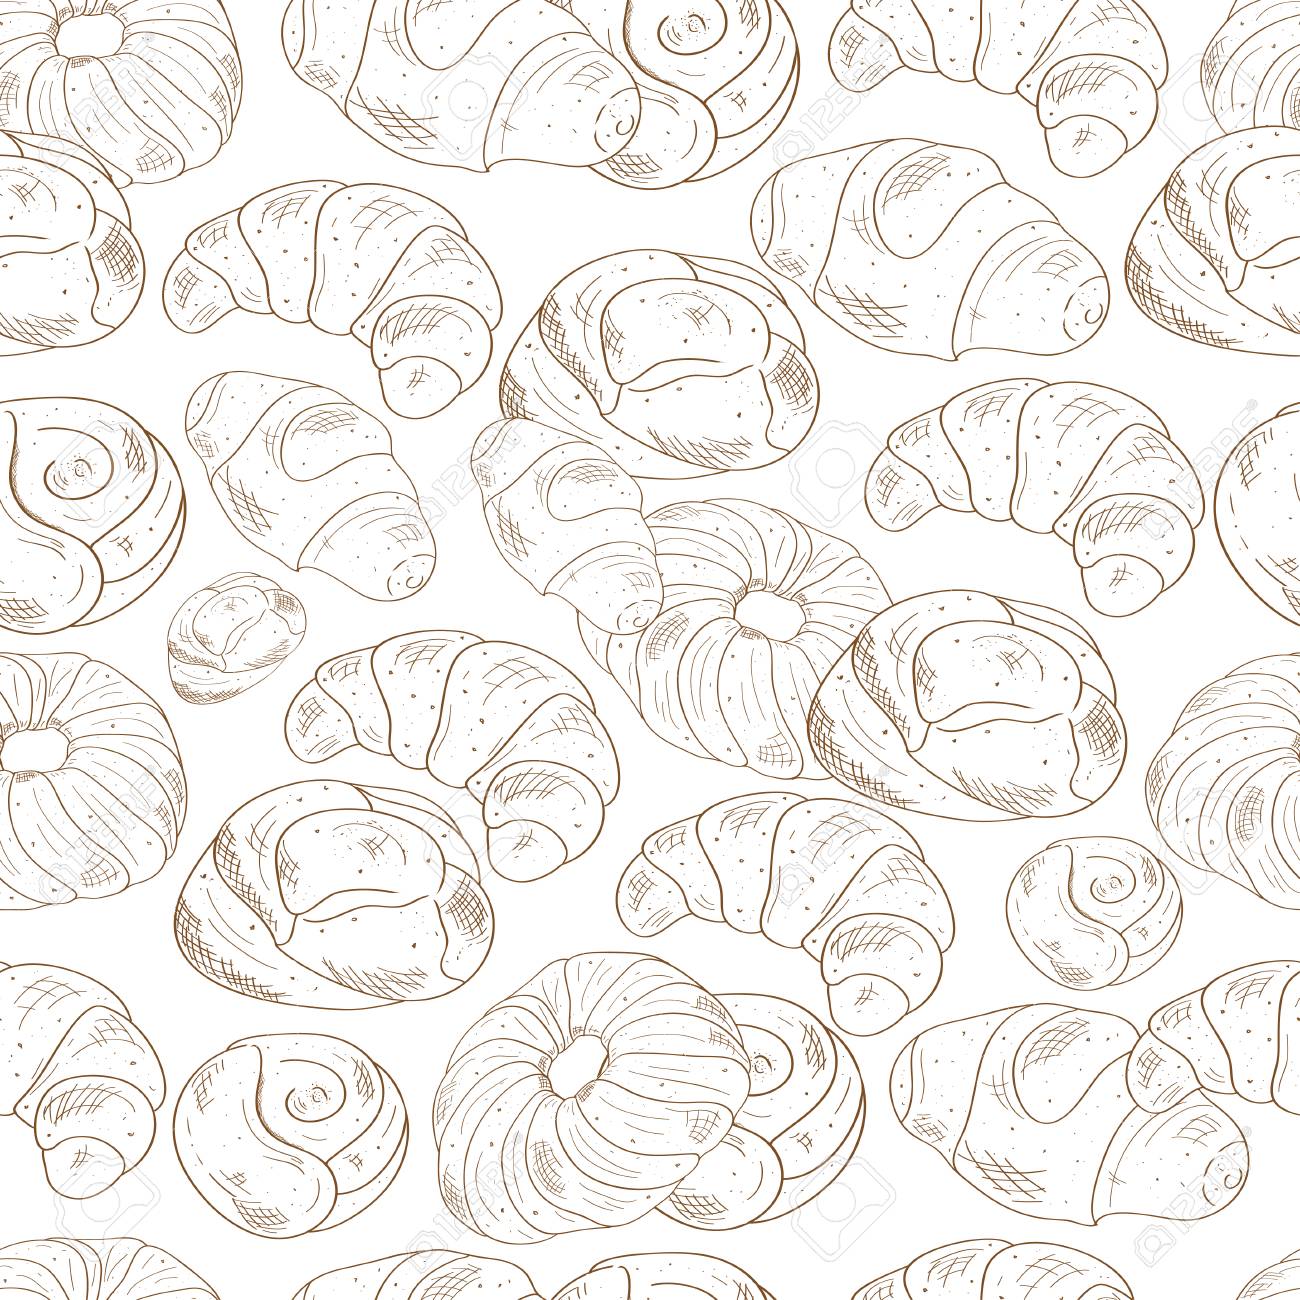 Bun And Croissant Background Wallpaper Seamless Sketch Doodle